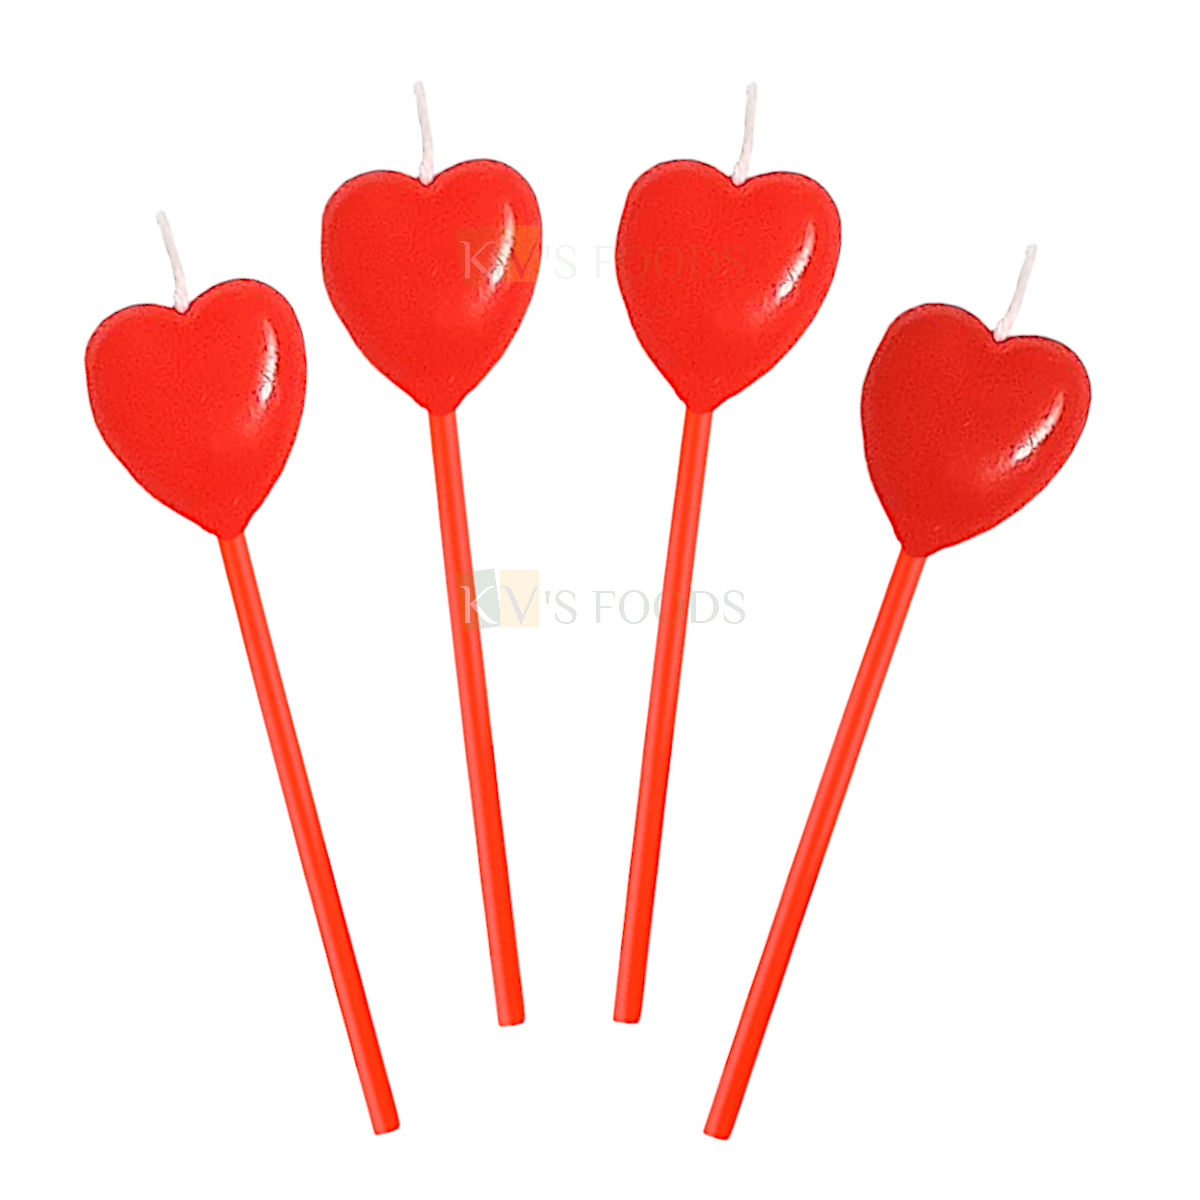 4 PCS Red Colour Heart Shape Wax Candles Cake and Cupcake Inserts Wedding Anniversary Love Valentine's Cakes Decorations Happy Birthday Theme Red Heart Candle DIY Cake Decorations